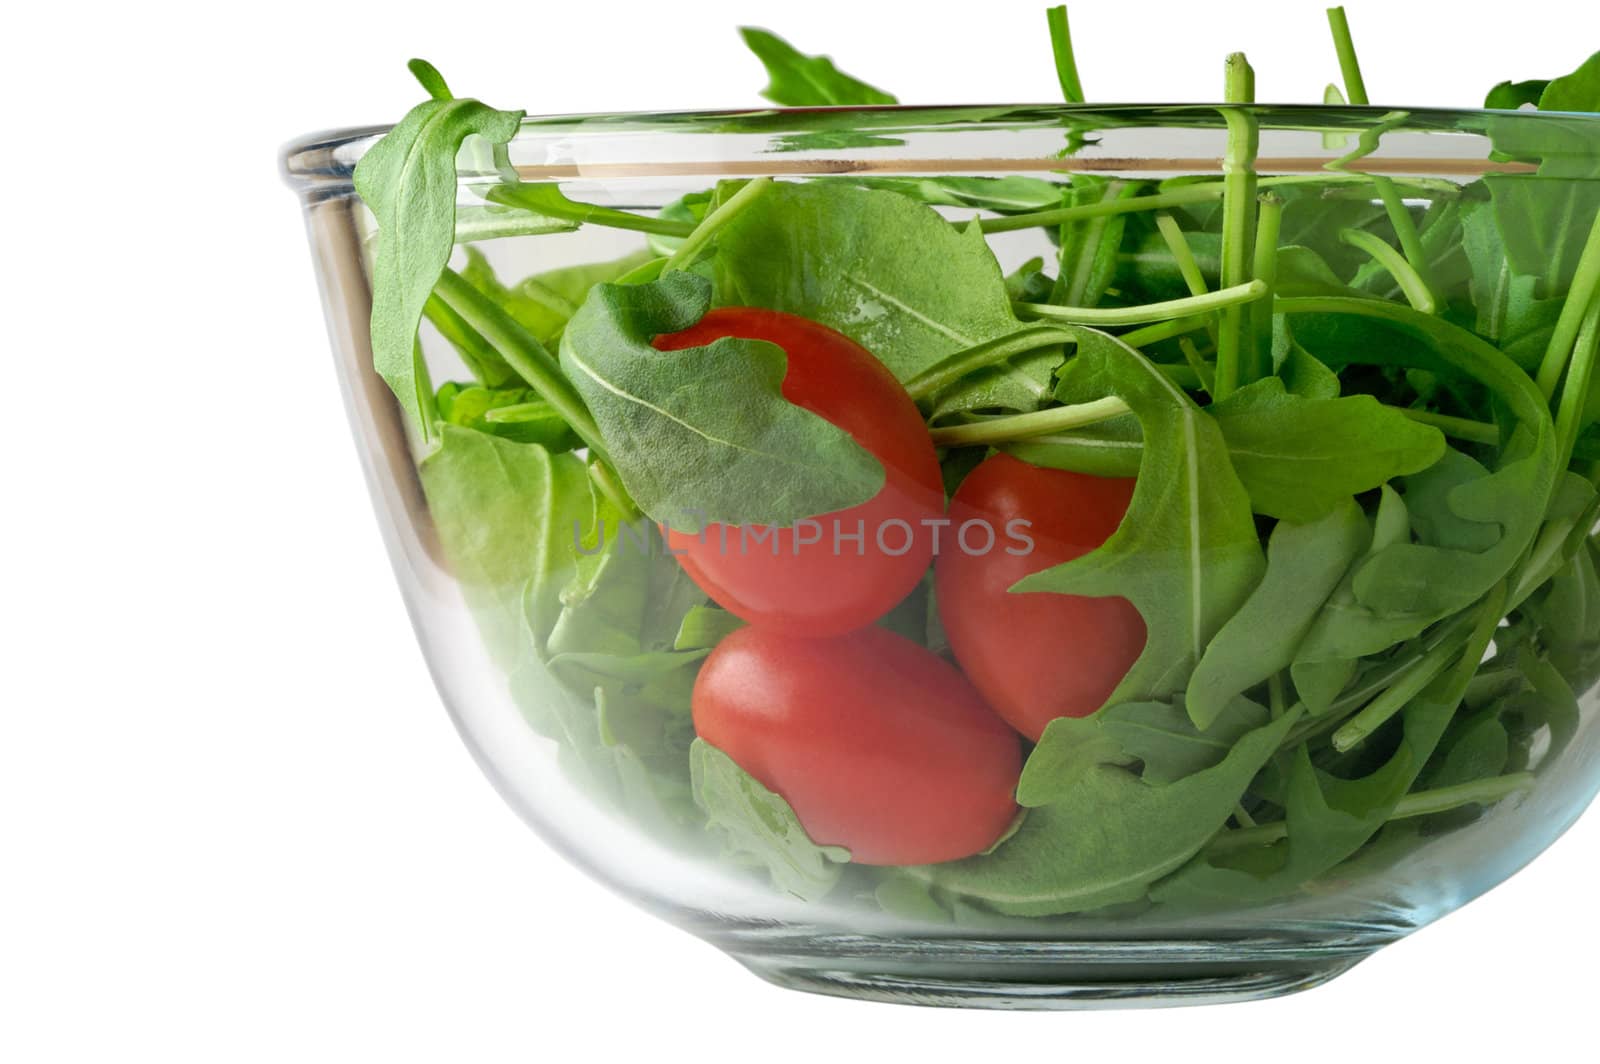 Salad with rugola and cherry tomato in glass bowl (side) with clipping path by Laborer